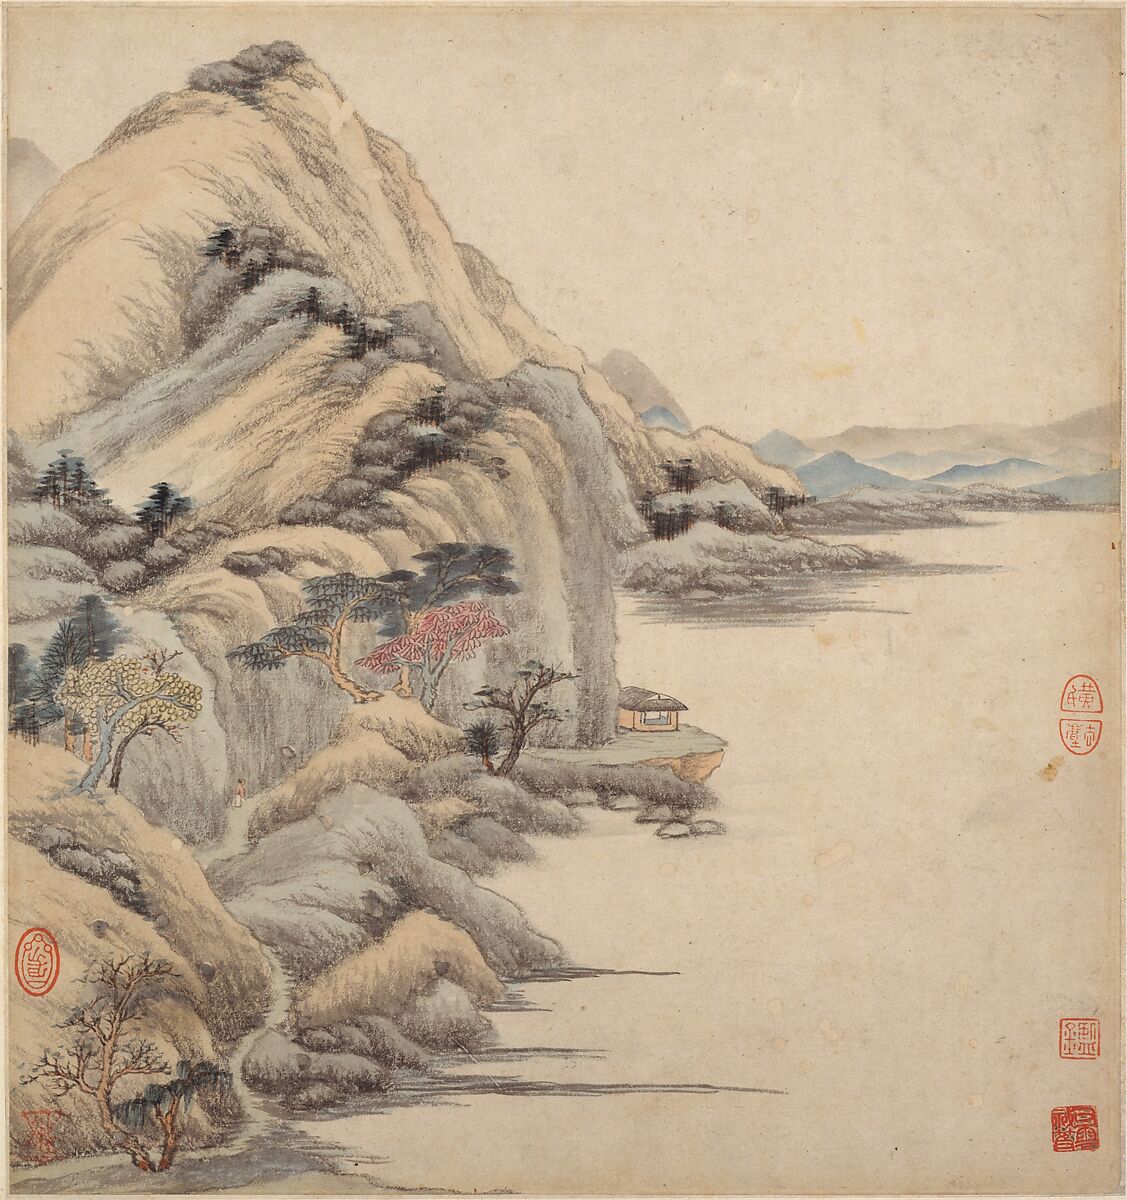 Landscapes in the styles of ancient masters, Wang Jian (Chinese, 1609–1677/88), Album of eighteen leaves; ink and color on paper, China 